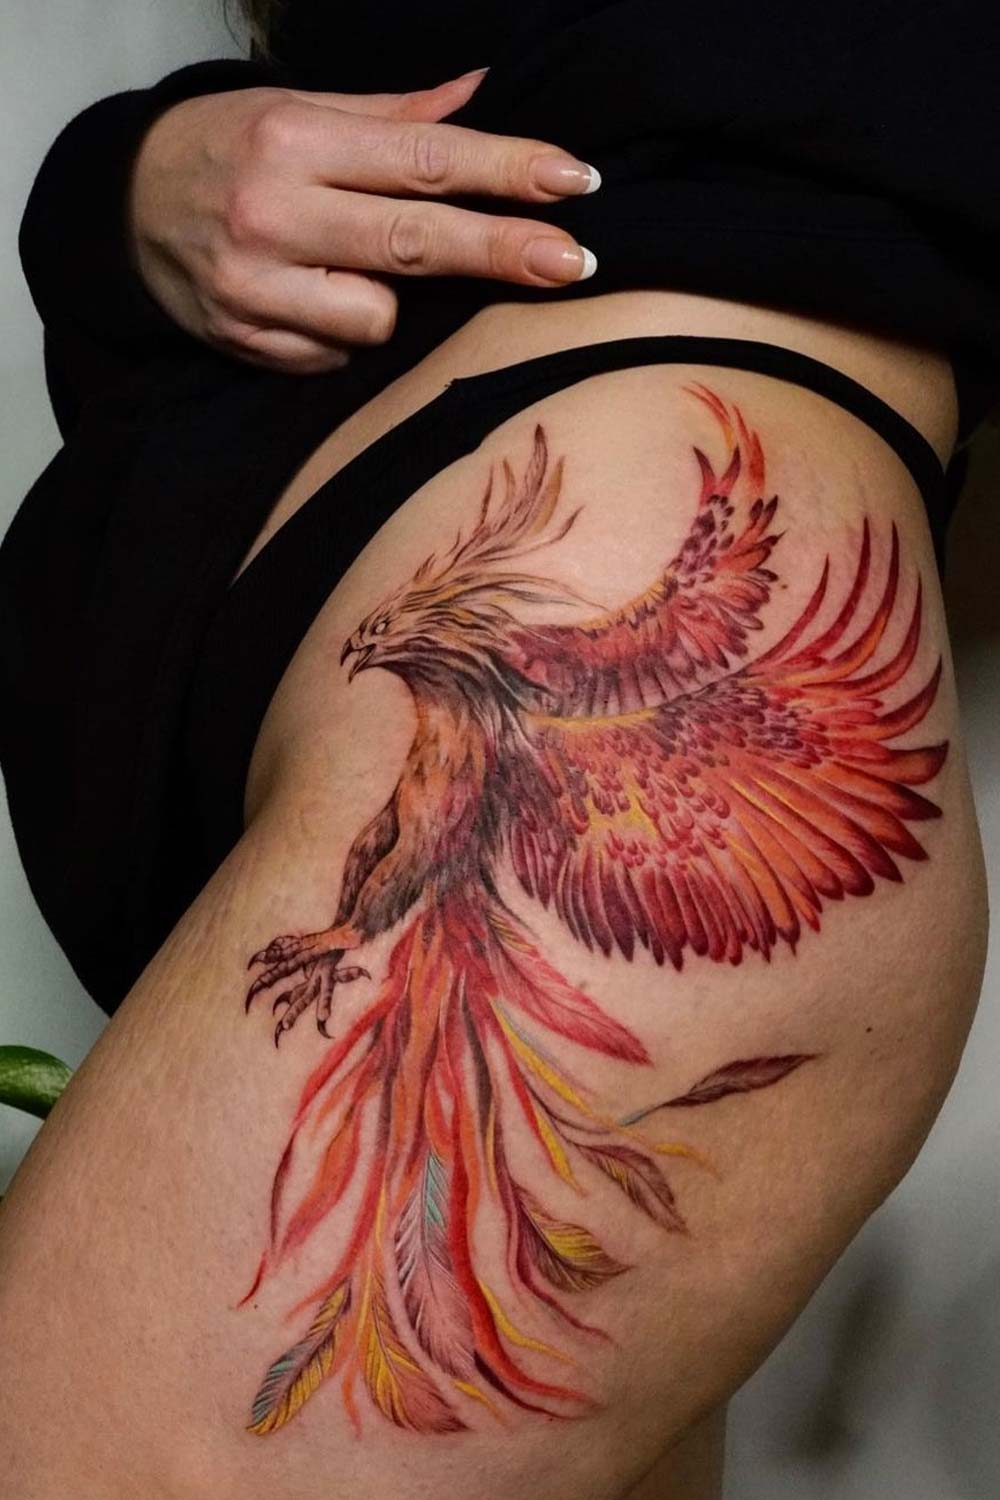 tattoo of a Phoenix rising from ashes in a galaxy on Craiyon